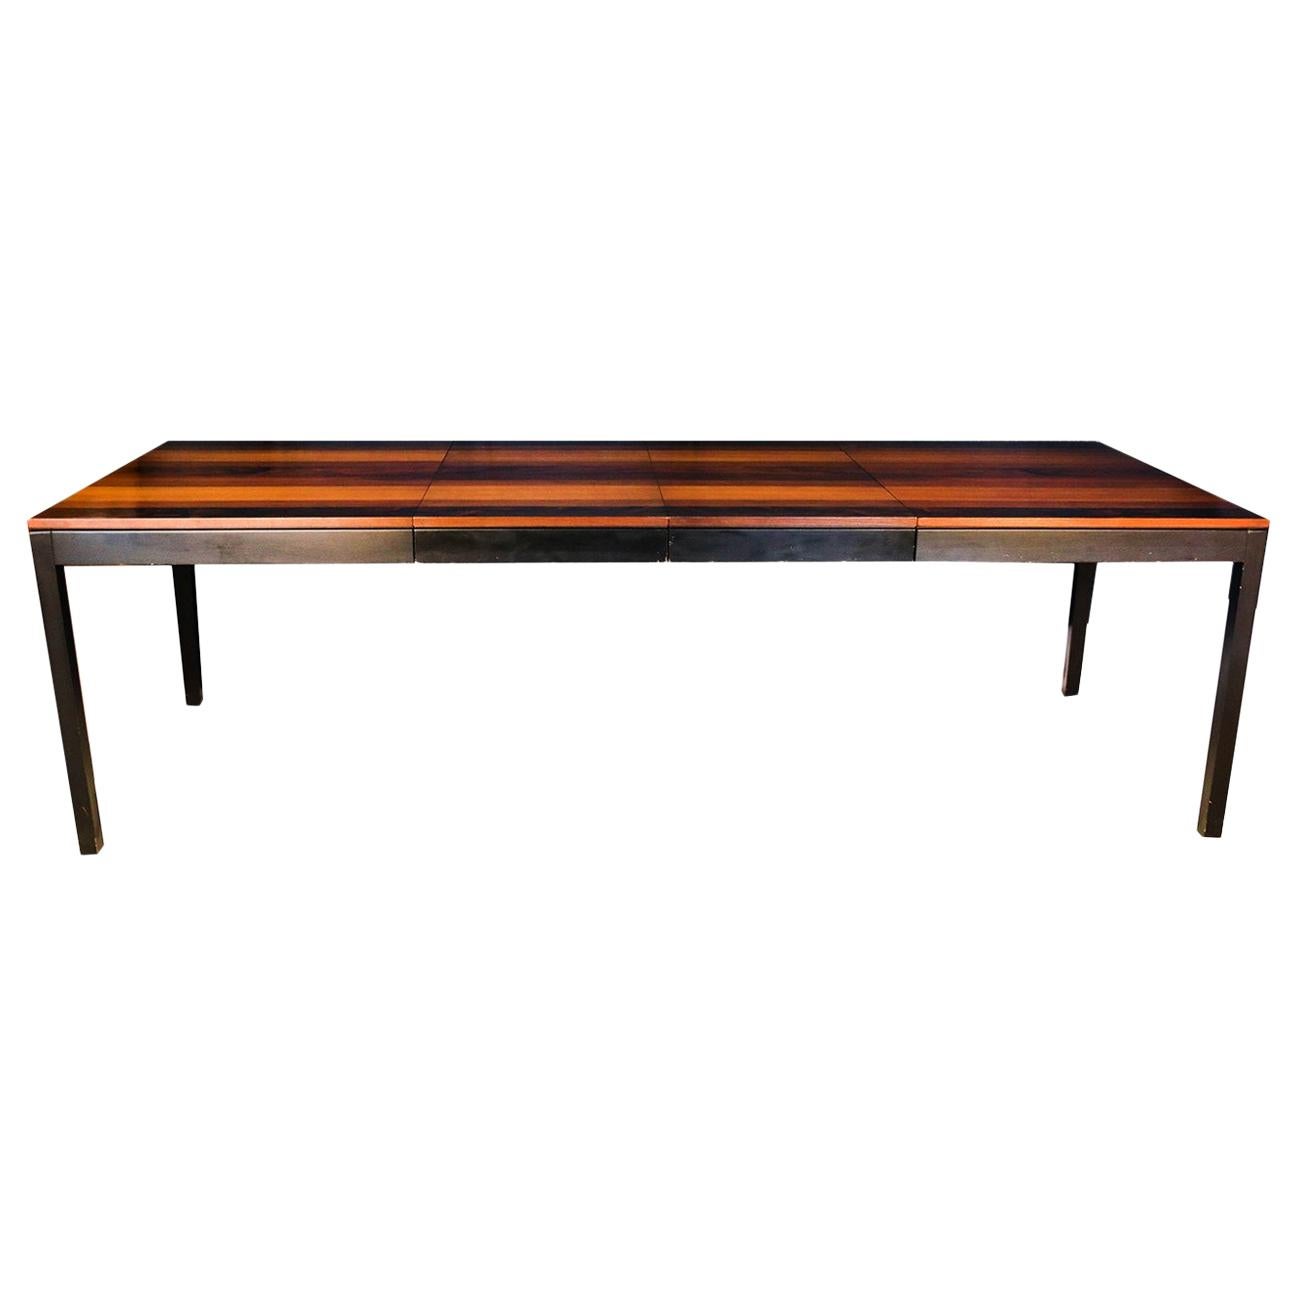 Midcentury Expandable Milo Baughman Dining Table for Directional